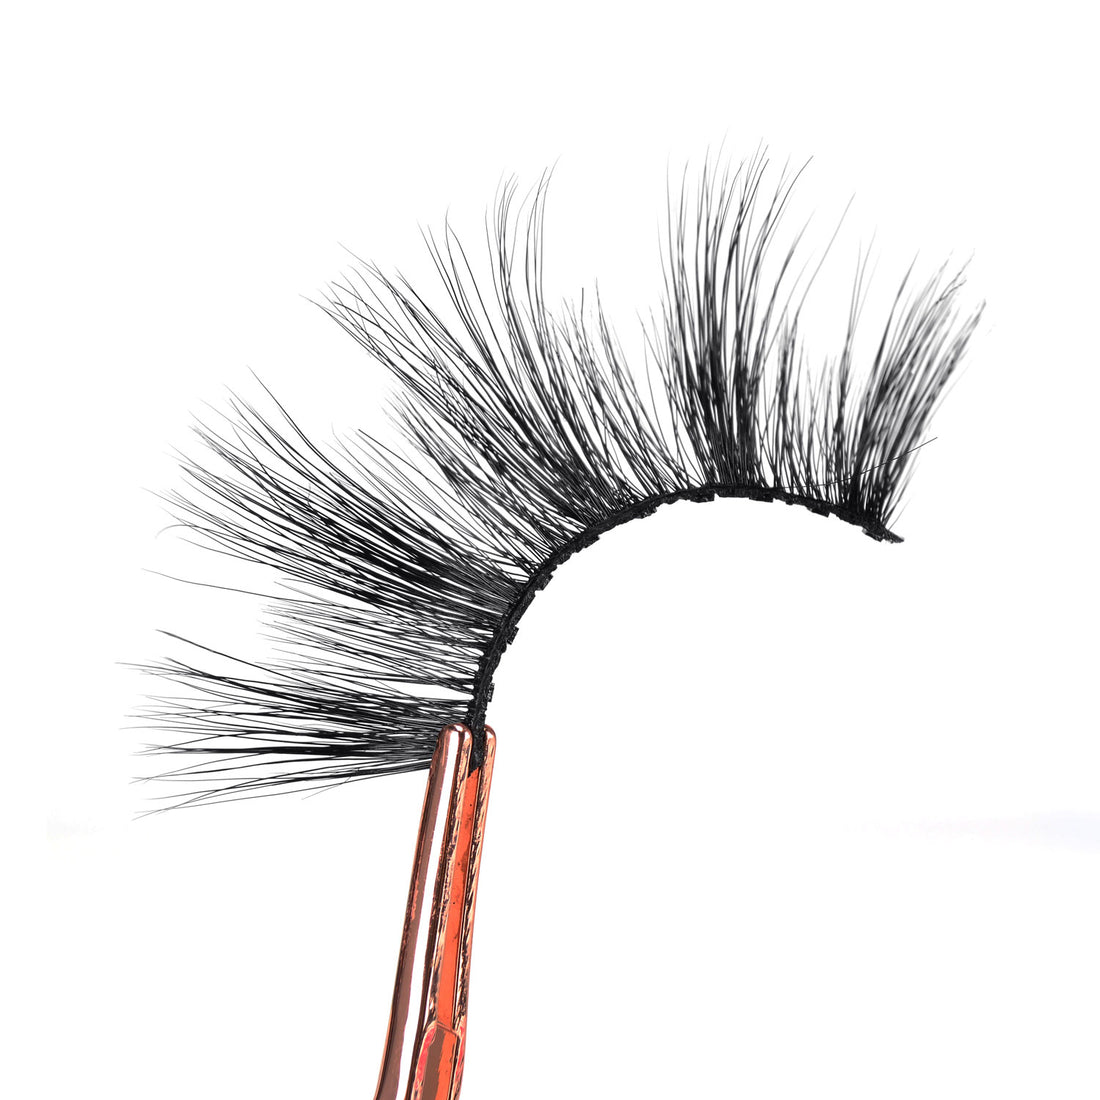 OMG 3D Mink Lashes - 10 pairs